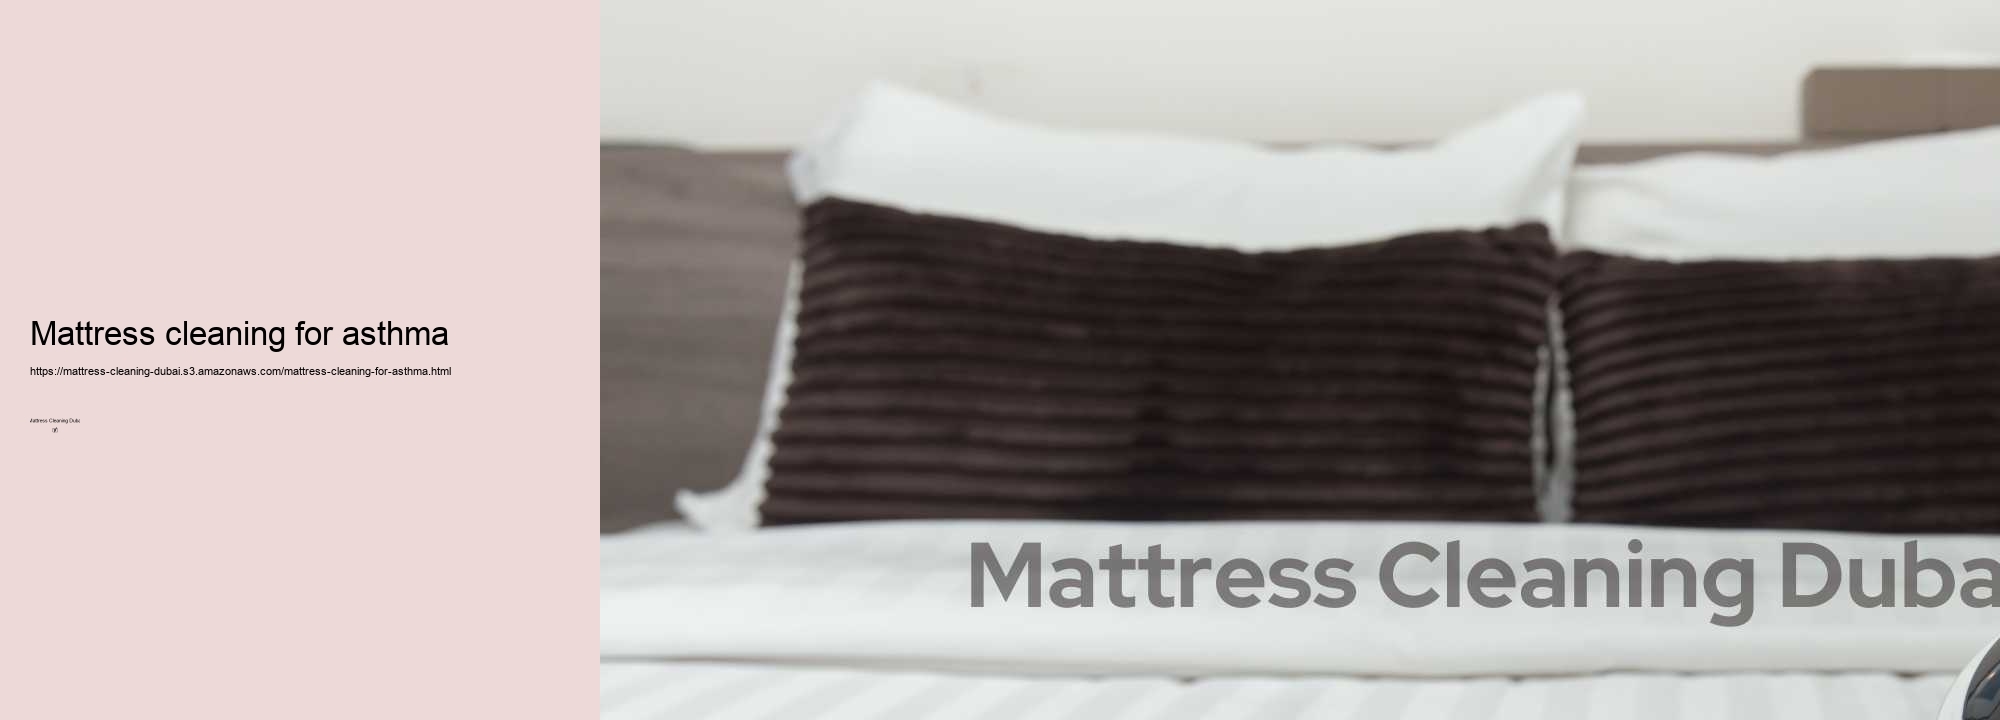 Mattress cleaning for asthma